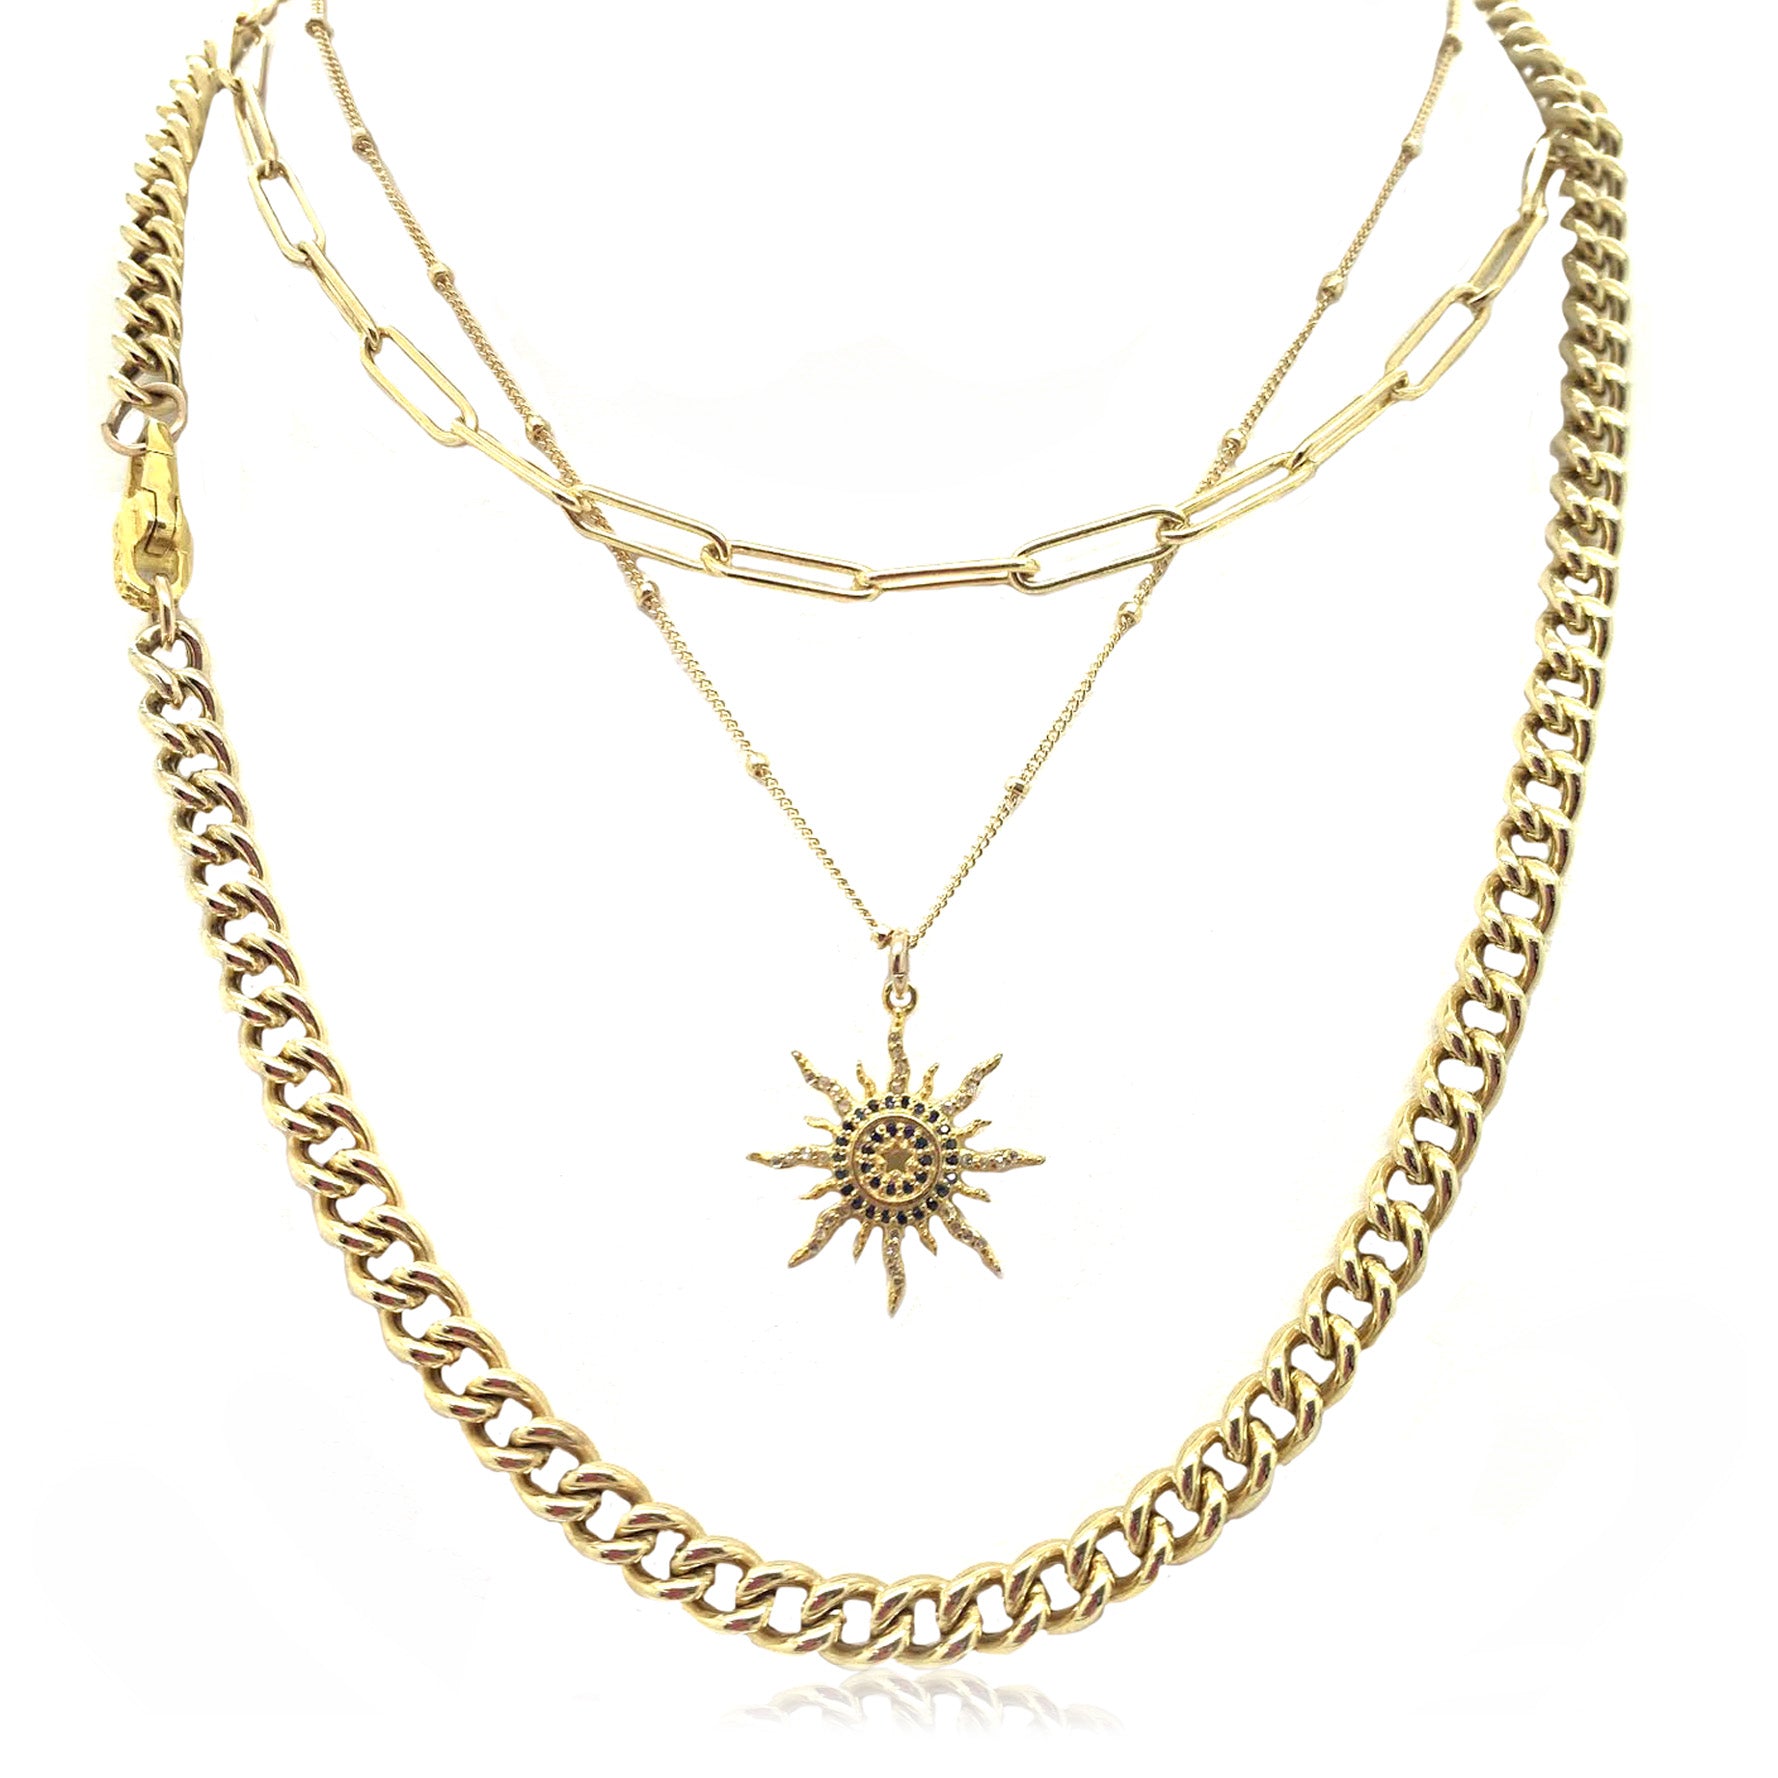 Sunny Days Ahead Layered Necklace Set -Gold-filled